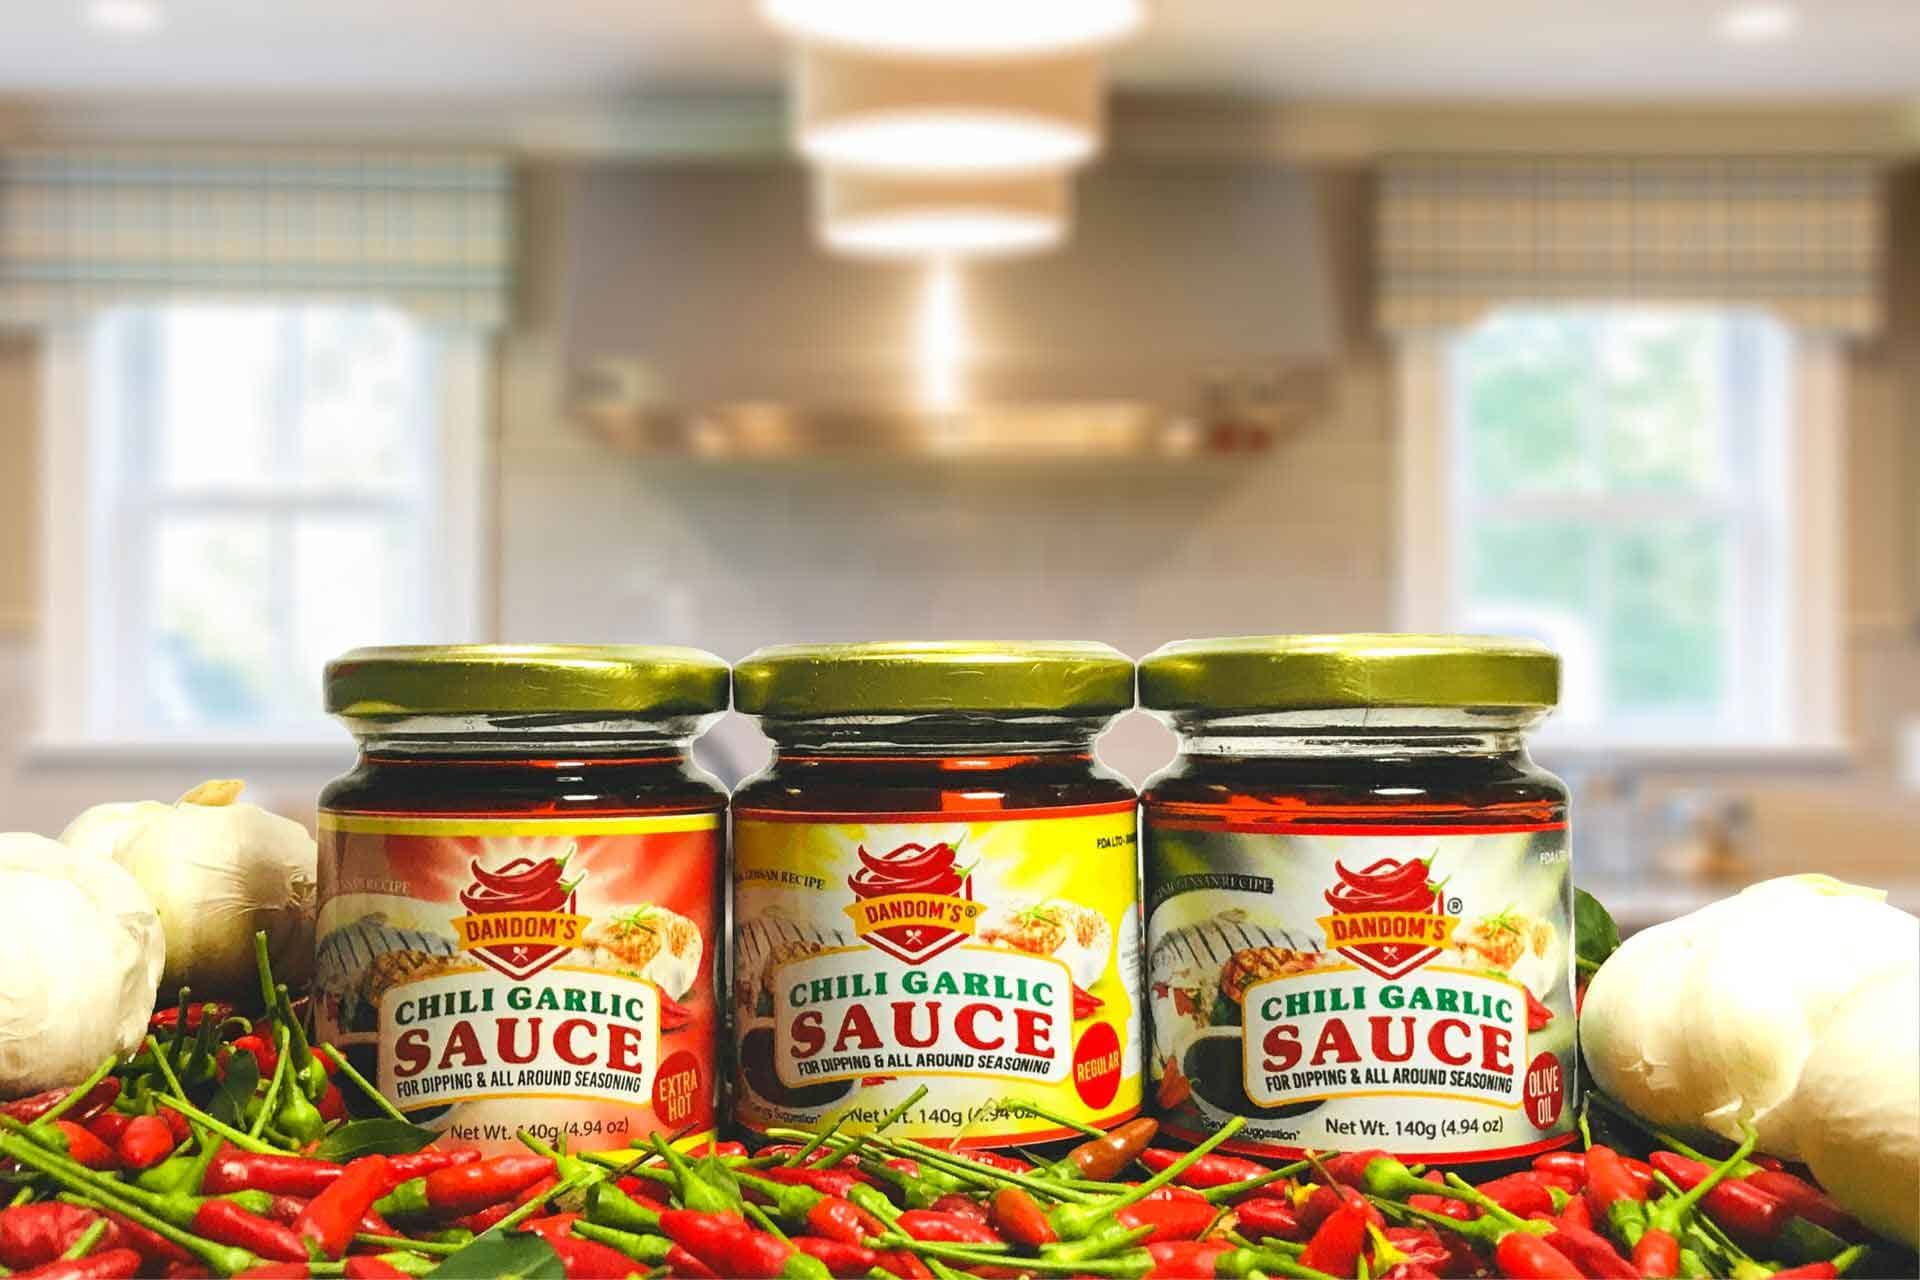 You are currently viewing Dandom’s Chili Garlic Sauce: The Wonder Sauce!